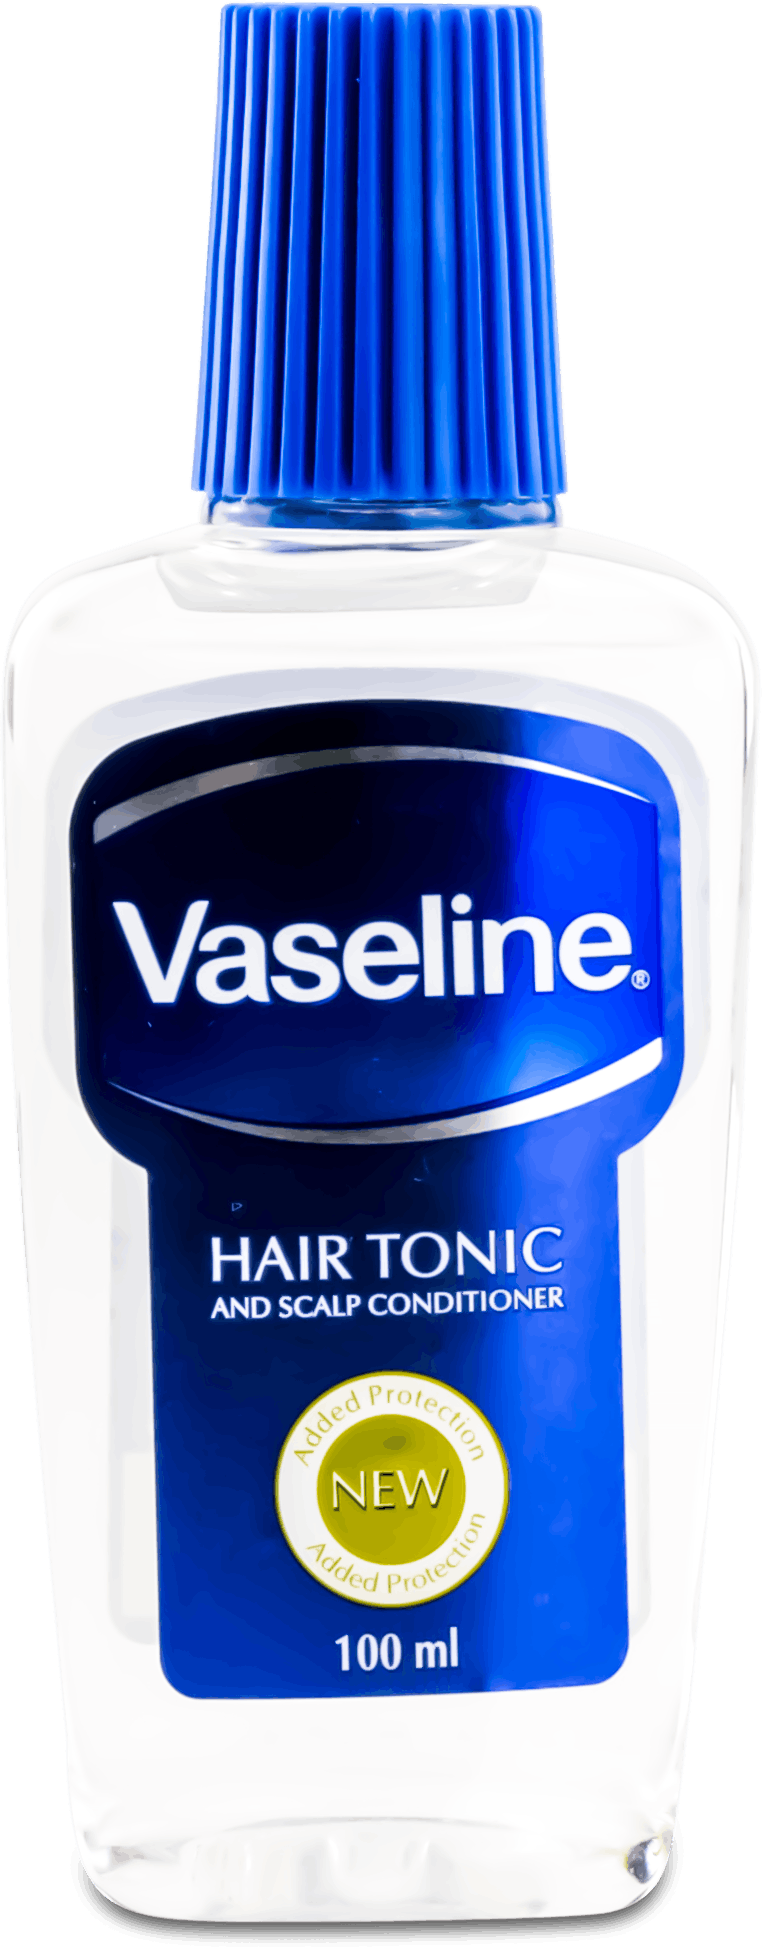 Vaseline For Hair: Is It Safe To Use Petroleum Jelly On Hair?